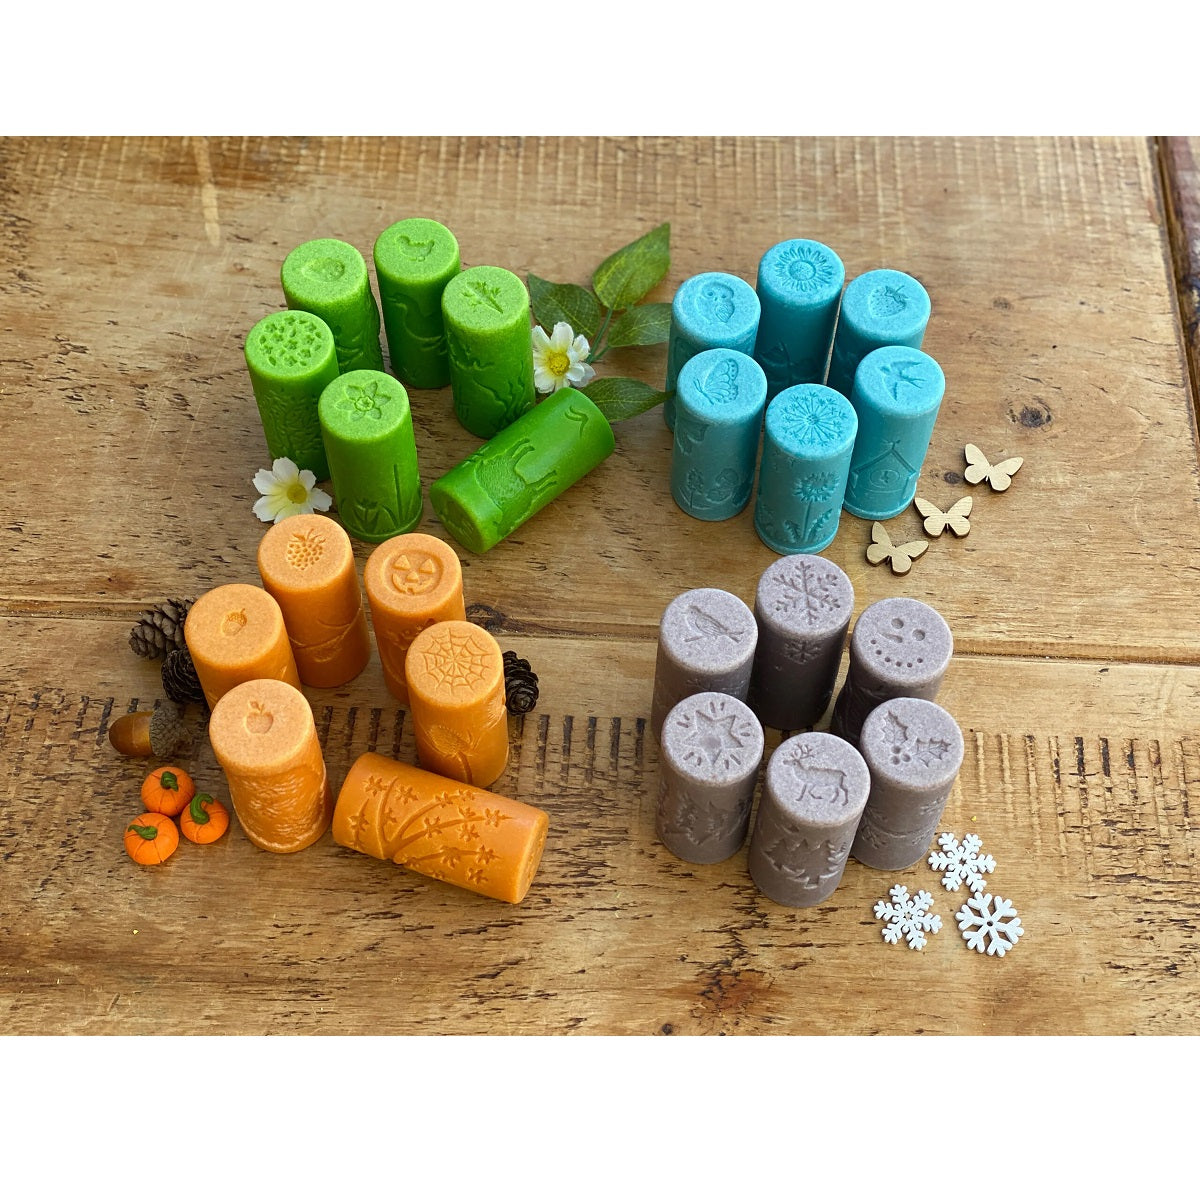 Sensory Stamper and Roller - About Seasons Set of 24 感官印章滾筒: 季節篇 24個套裝